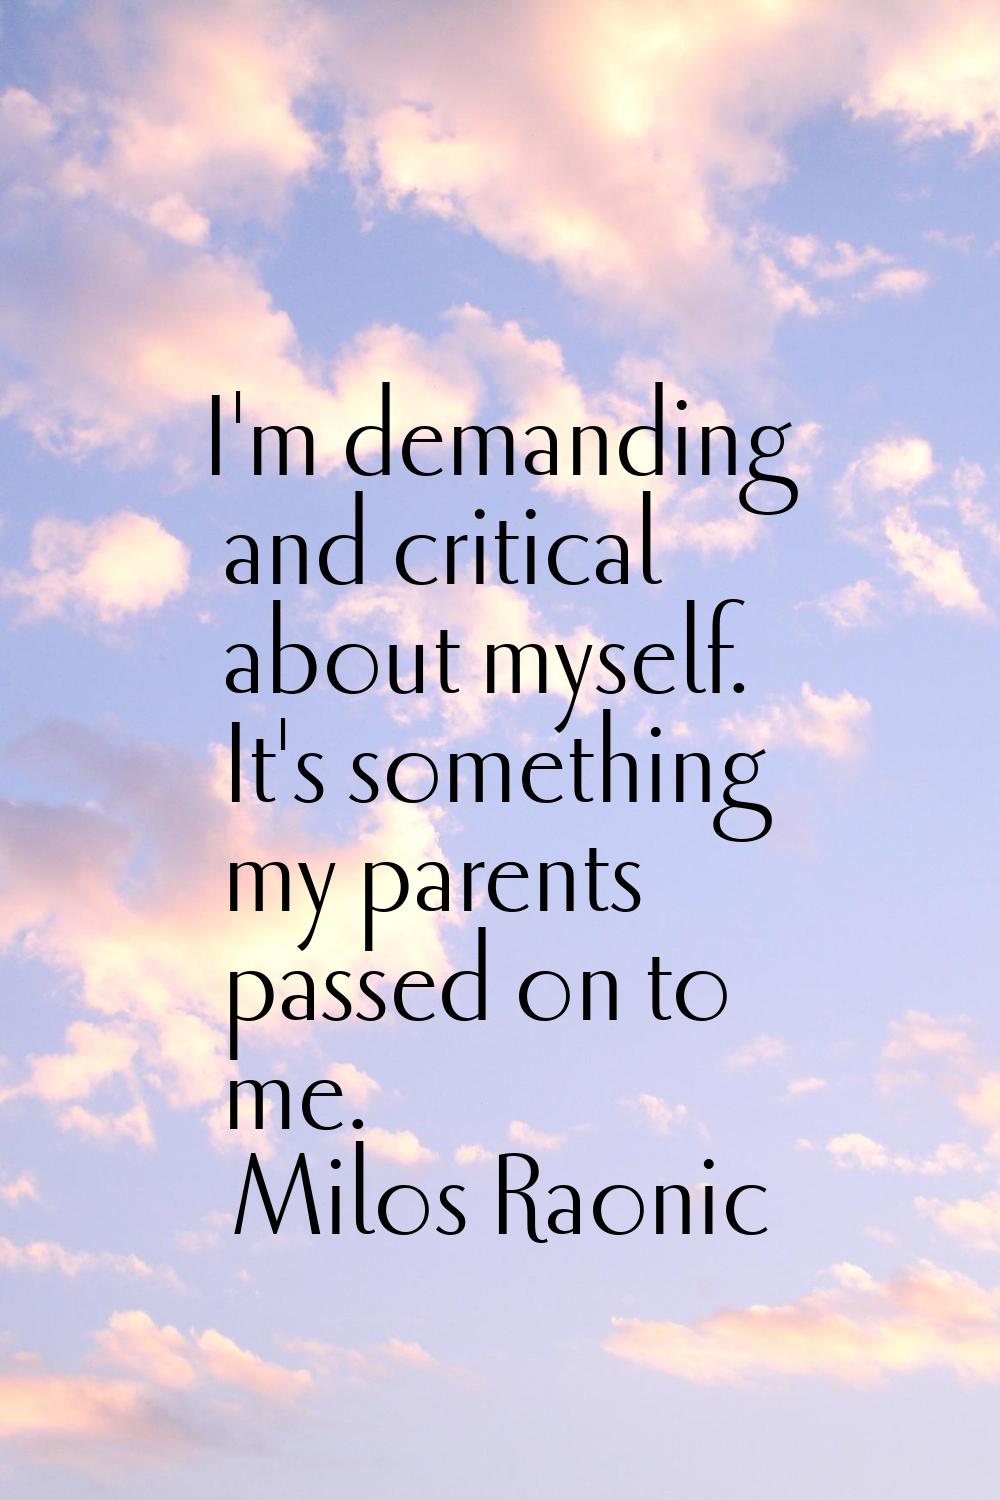 I'm demanding and critical about myself. It's something my parents passed on to me.